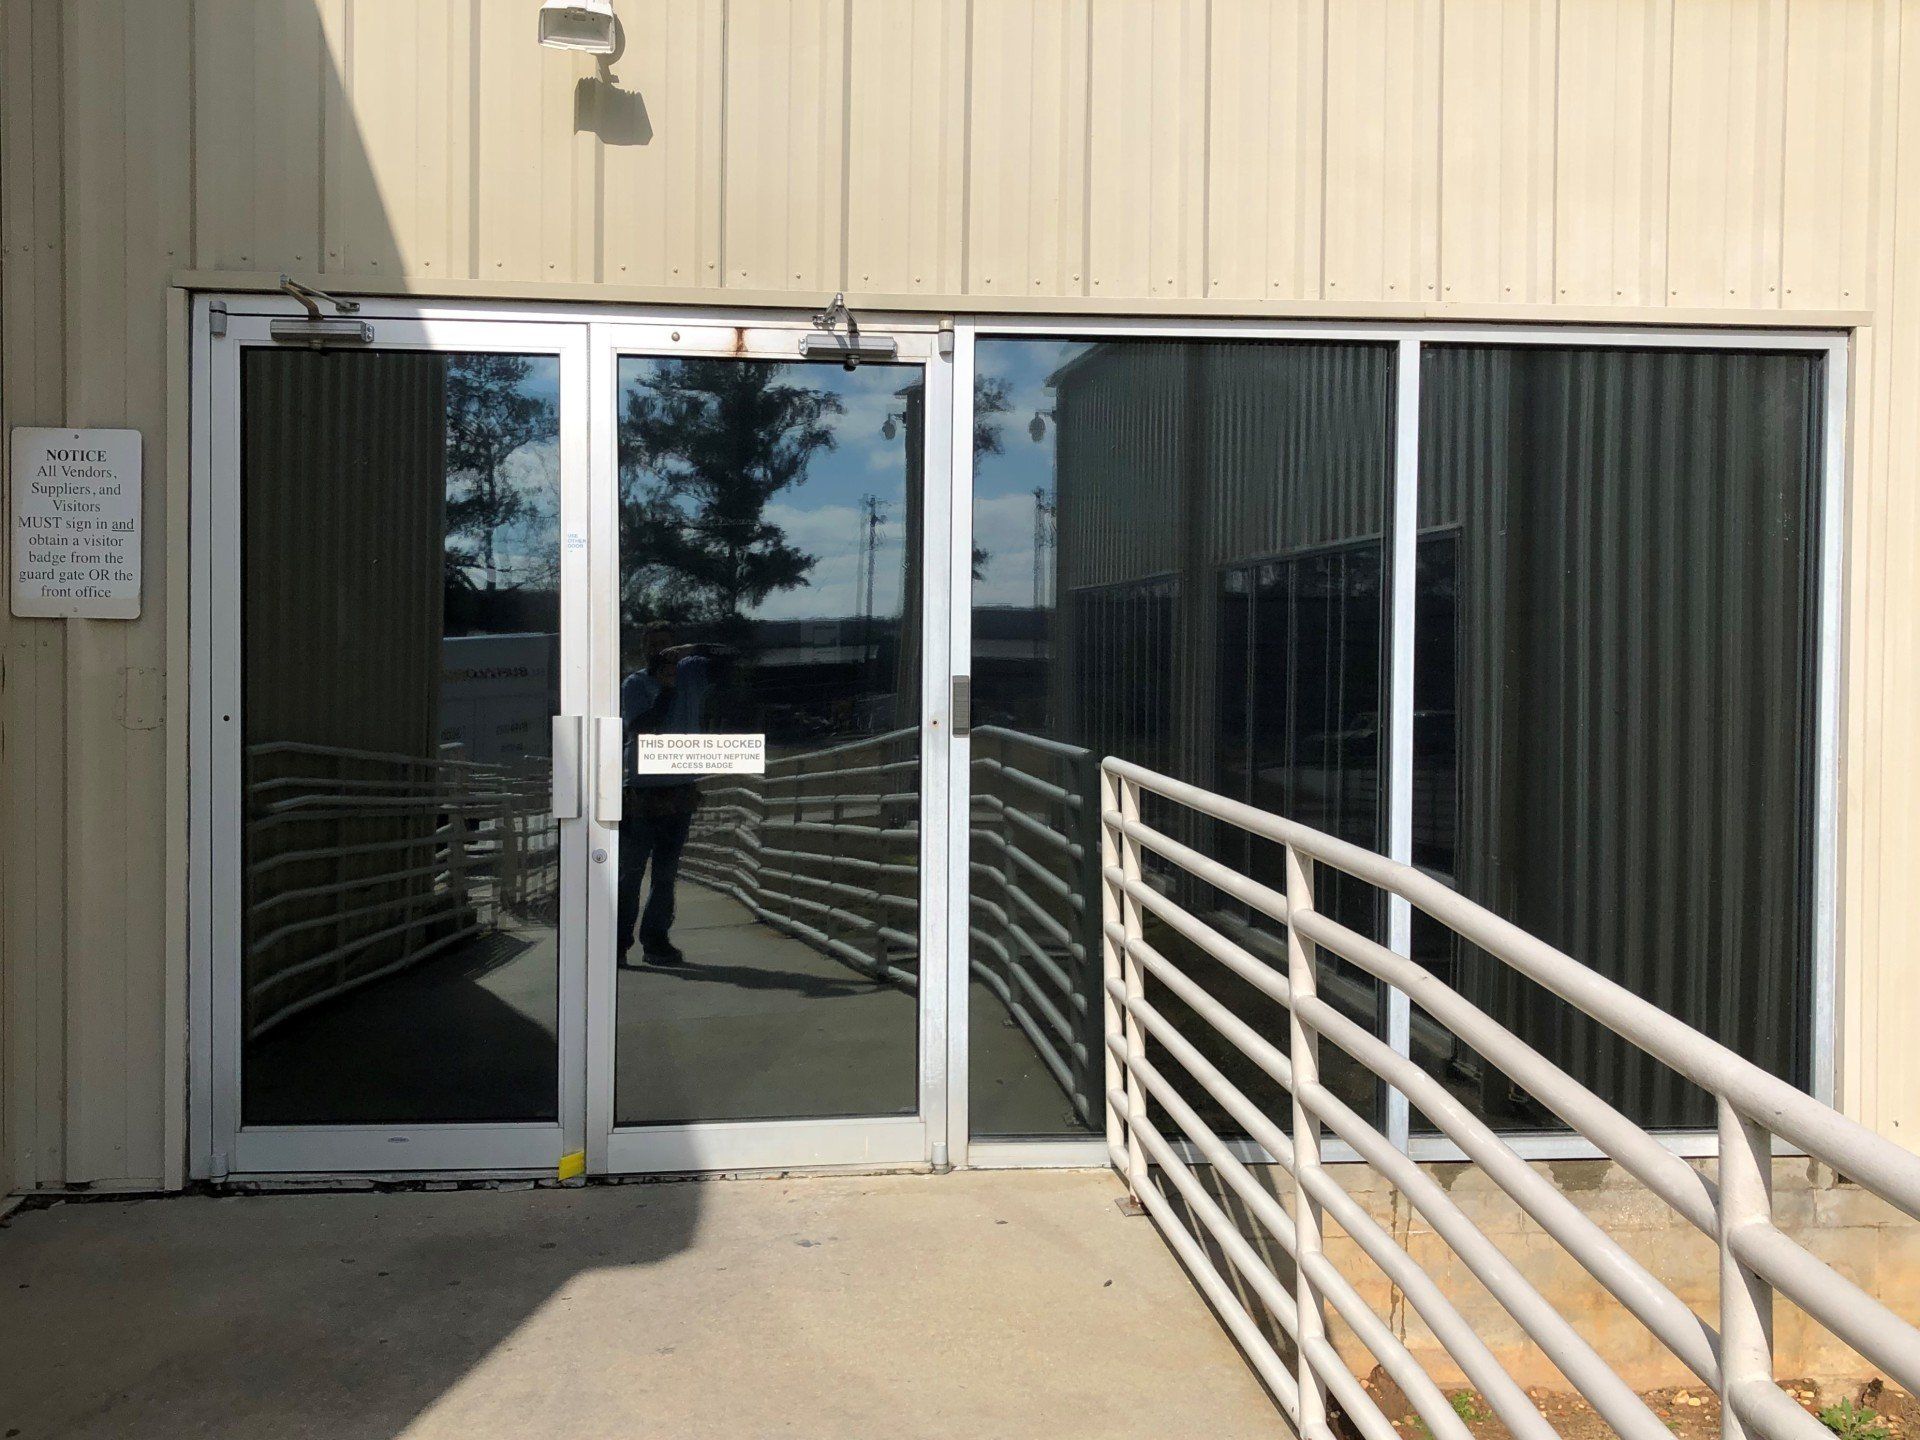 Commercial tint Tallassee - installed at Tallassee Business  on 1/24/2019. Over 15x MORE benefits received by SPF Tint